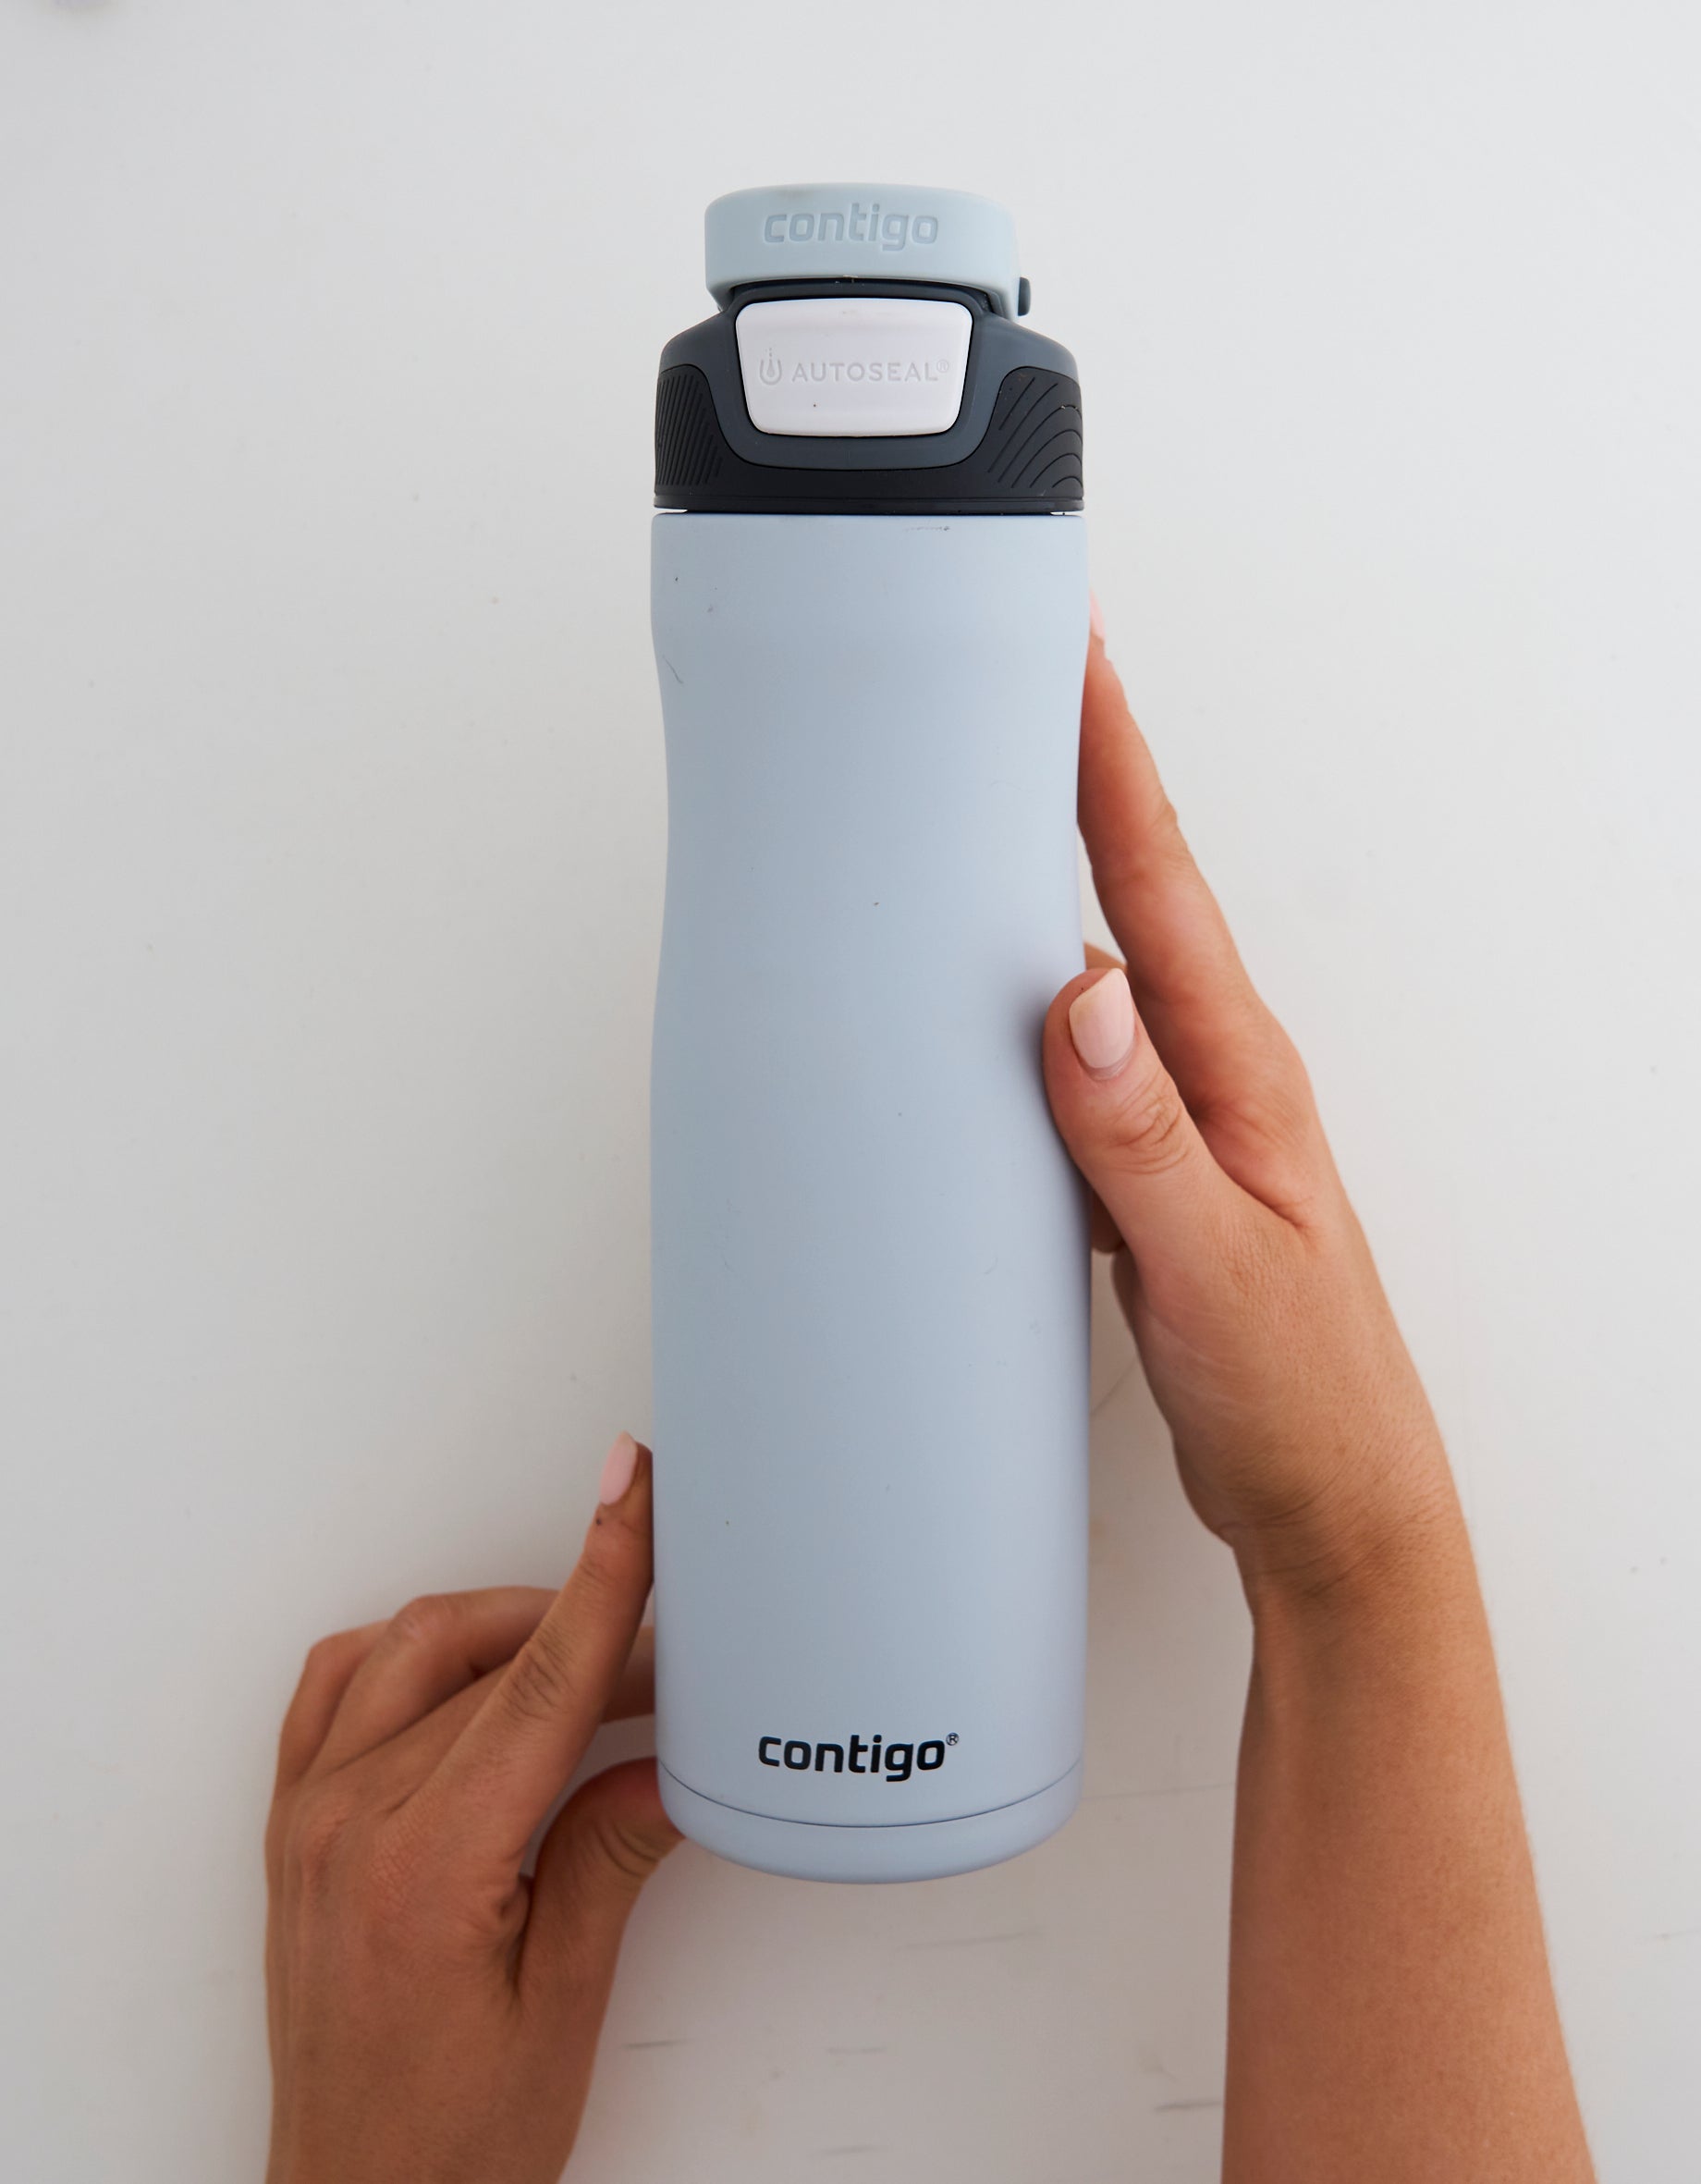 Contigo Autoseal Chill Vacuum Insulated Stainless Steel Water Bottle